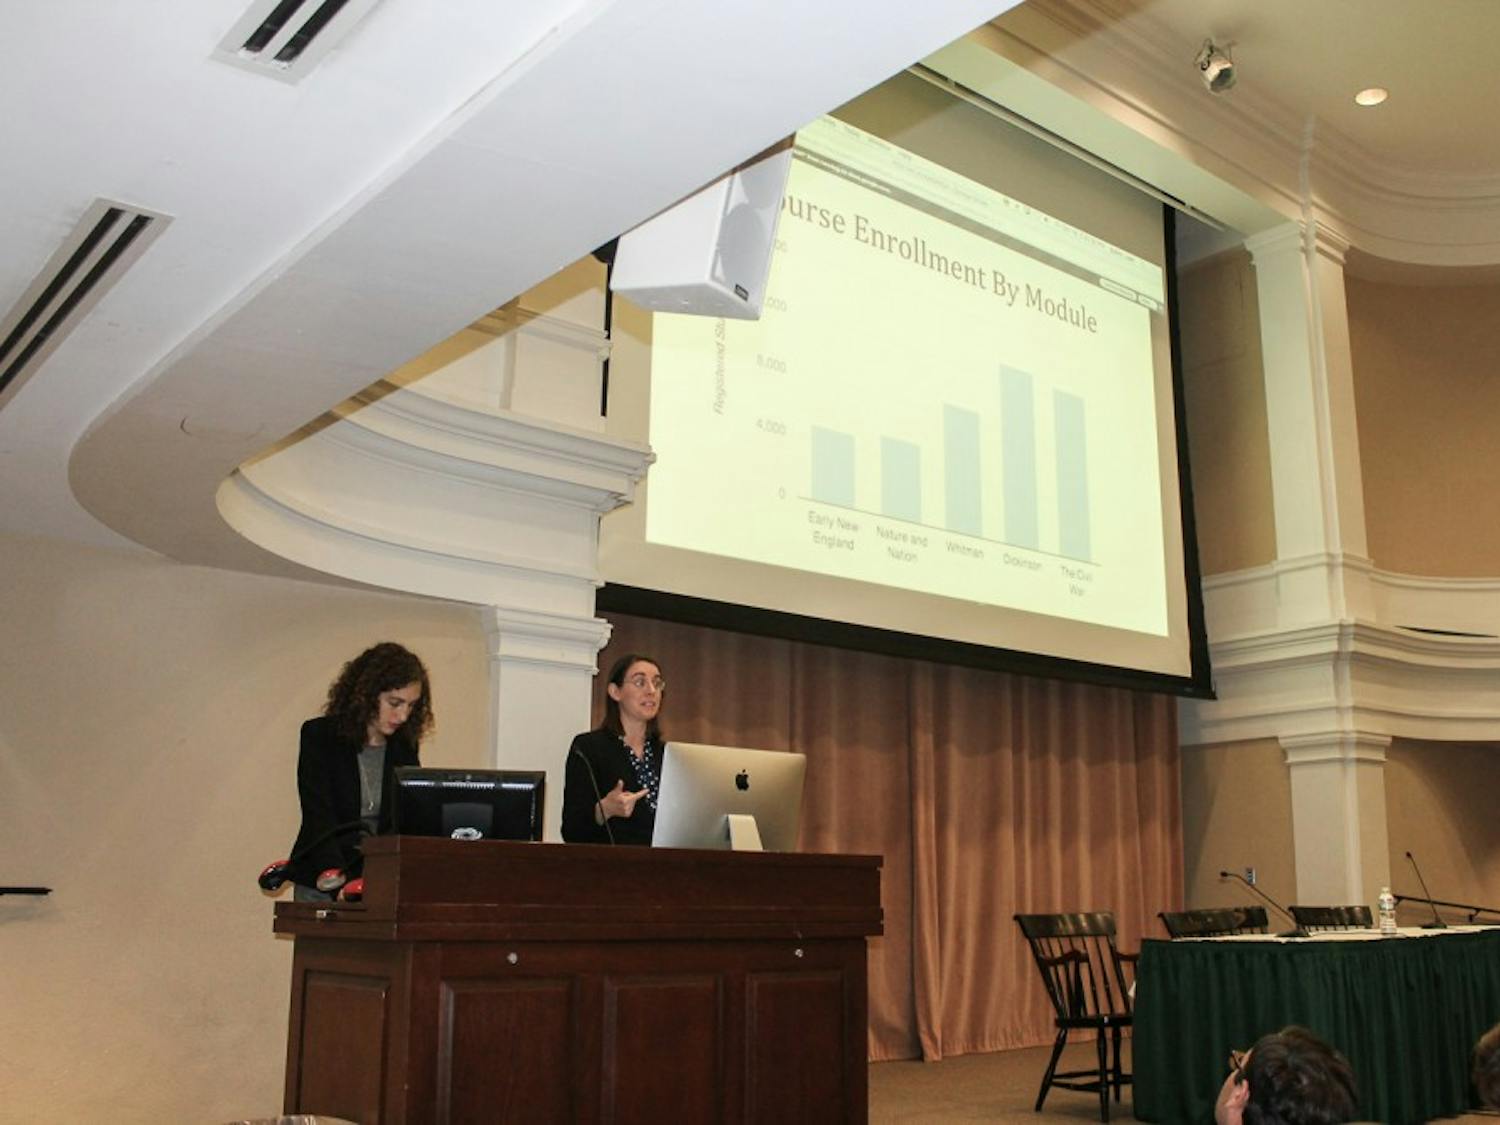 Professors from multiple schools gathered at the College to discuss MOOCs. 